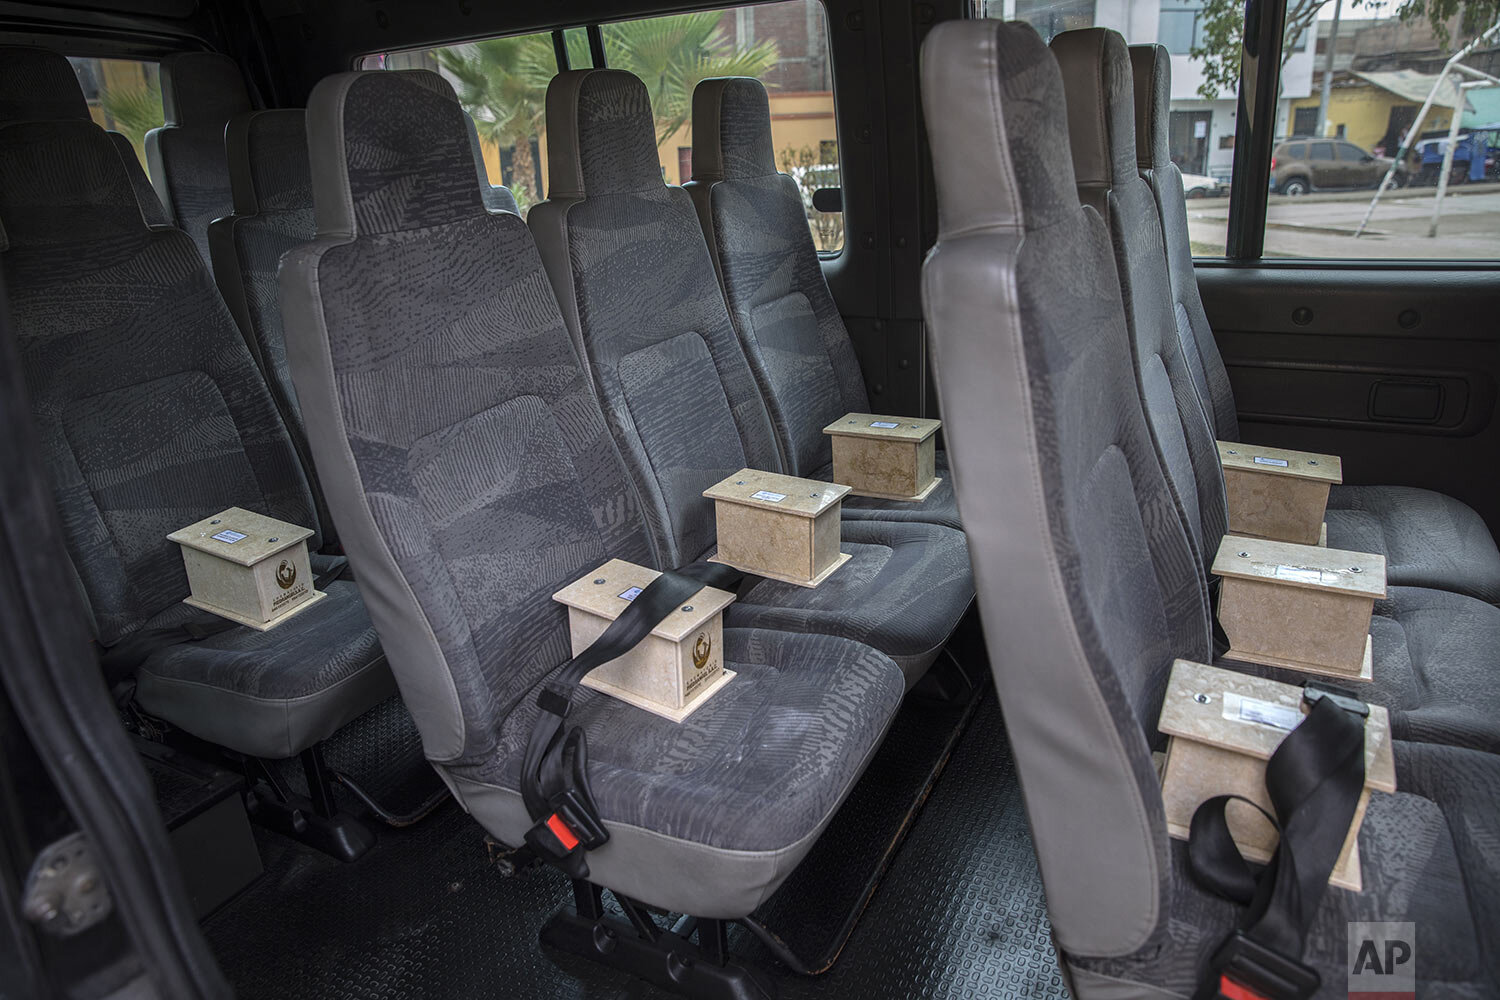  Urns of cremated remains of people who are suspected to have died from COVID-19 sit in a funeral home company van, to be delivered to loved ones in Lima, Peru, June 1, 2020. In March, Peru ordered the cremation of all coronavirus victims to prevent 